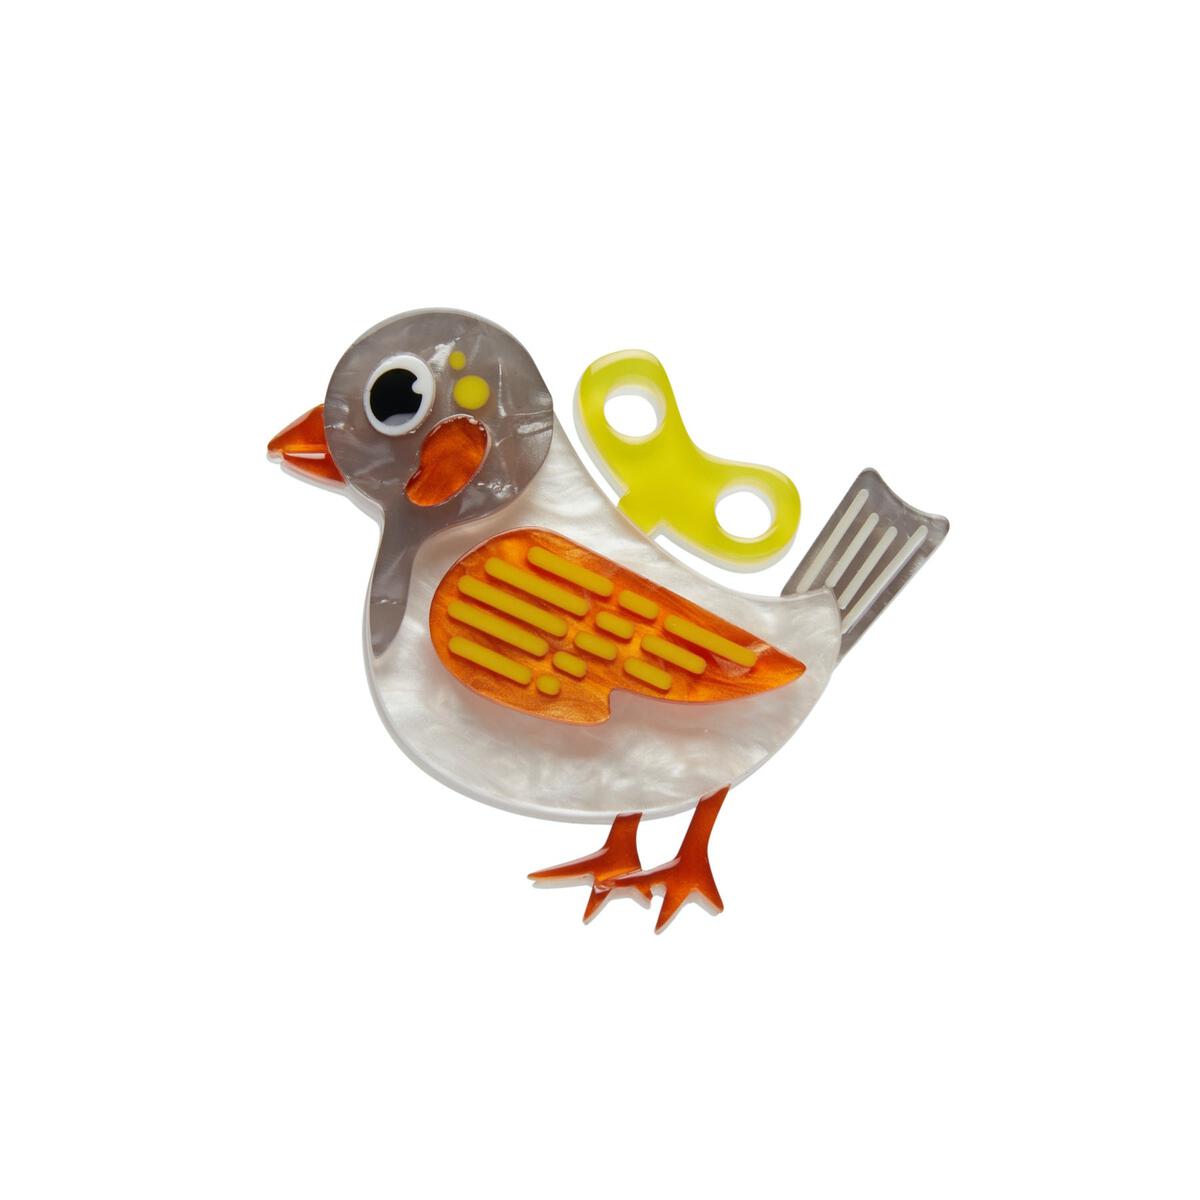 white, grey, orange, and yellow layered resin 2" key-operated toy bird brooch